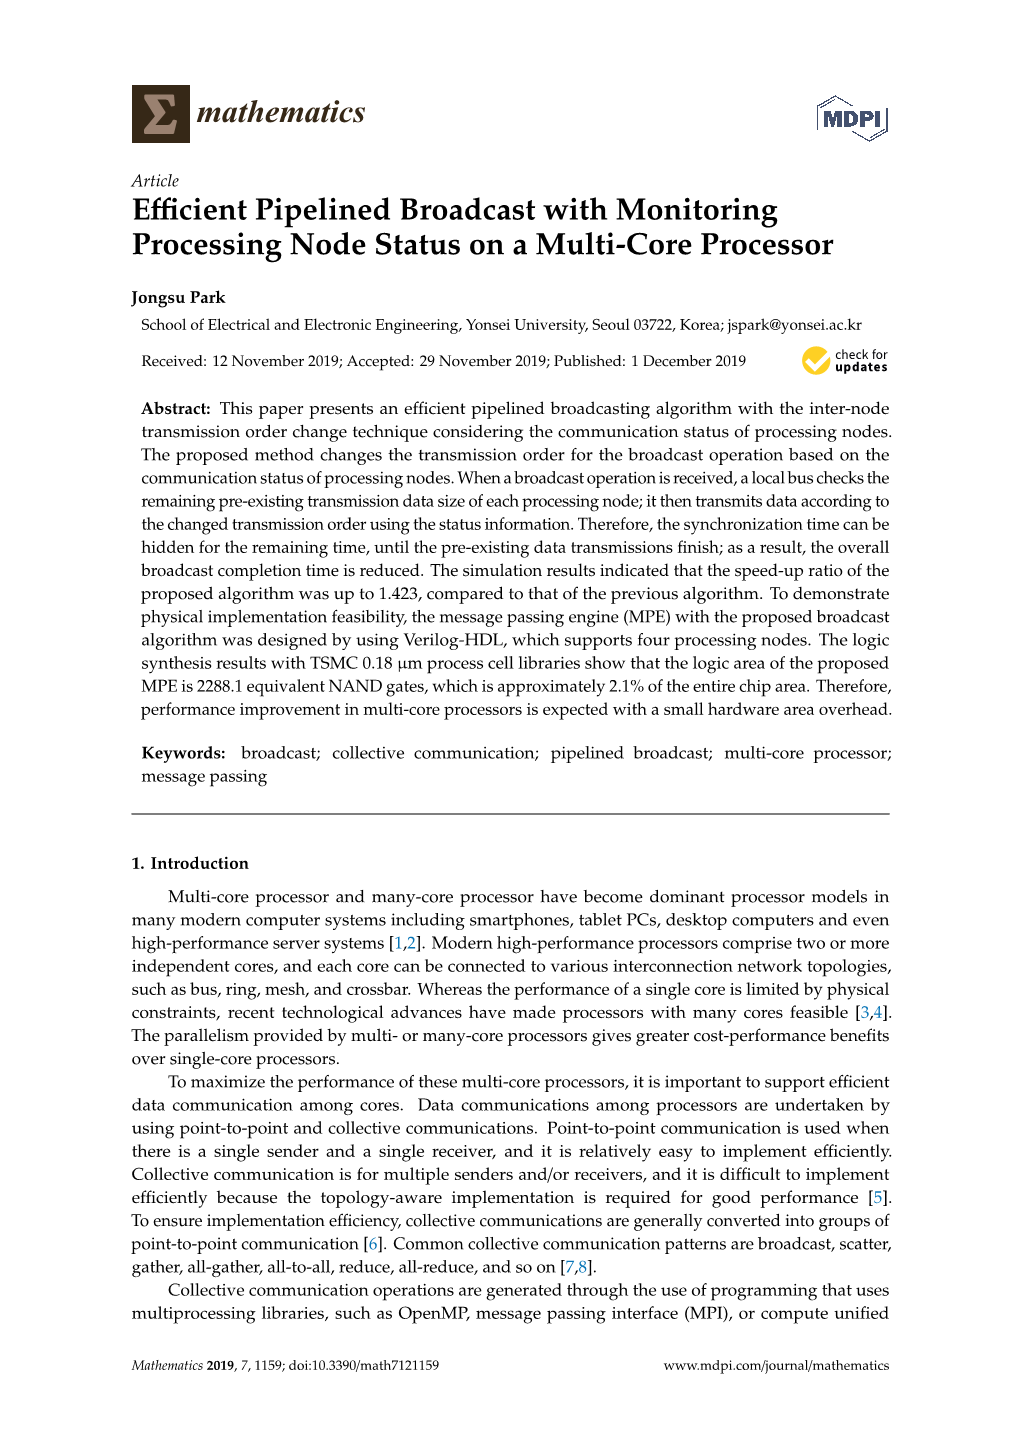 Efficient Pipelined Broadcast with Monitoring Processing Node